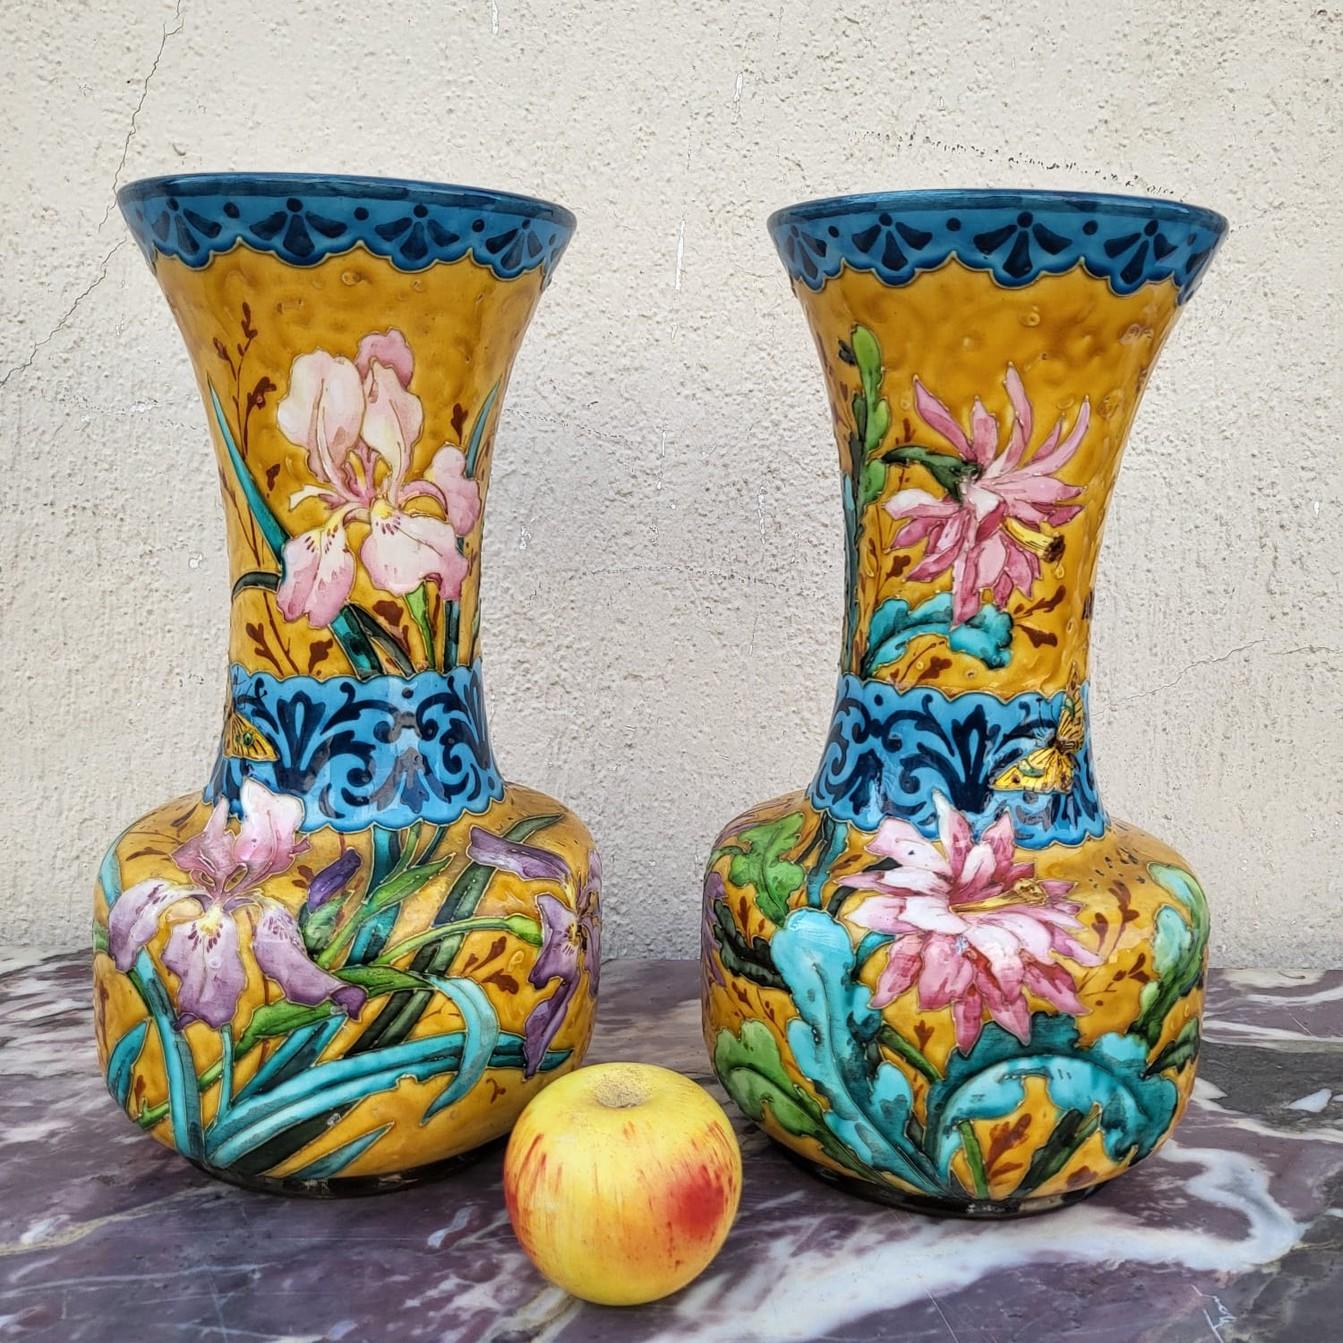 Pair of vases in the style of Théodore Deck, in polychrome and gold enamelled ceramic: Japanese decor of flowers (iris, dahlias and cherry blossoms) and animals (butterflies) on a yellow background
Blue enamelled interior

Wear from use and